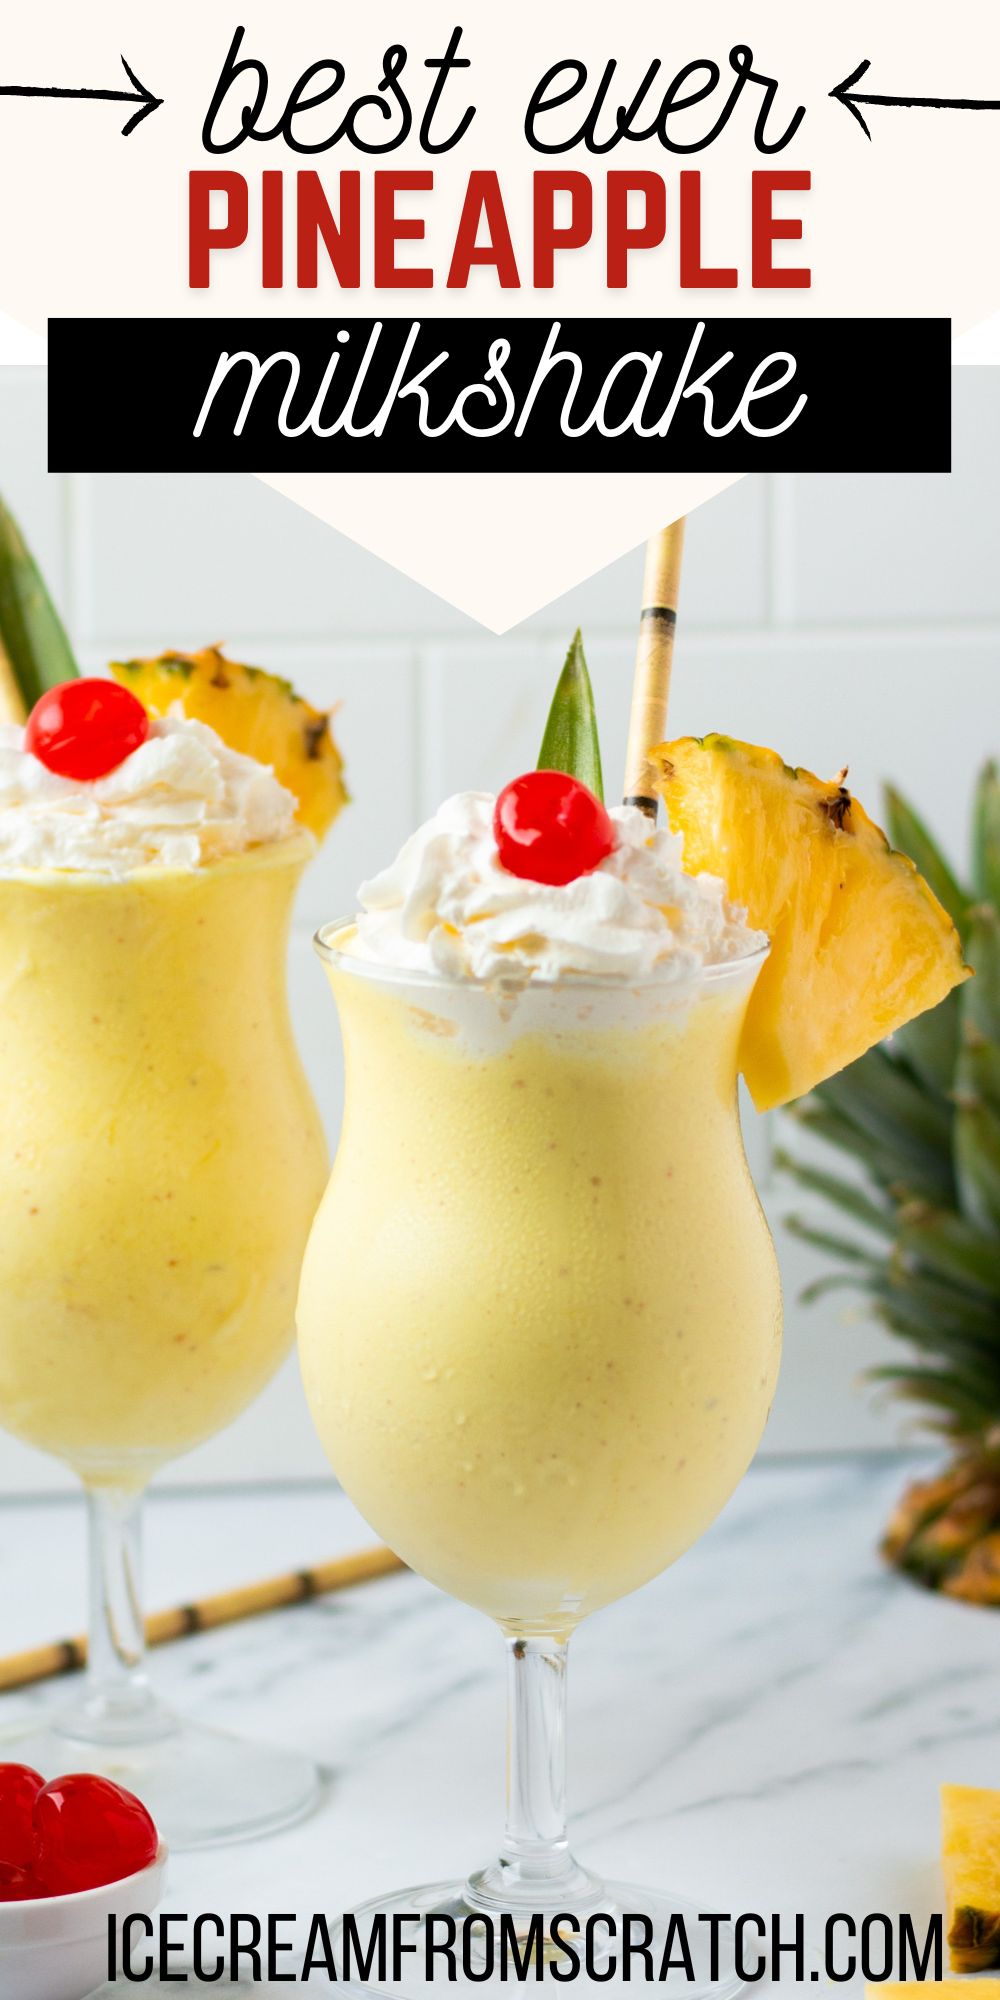 Two hurricane glasses filled with bright pineapple milkshake, topped with whipped cream, cherries, and pineapple wedges. Text at top of image says "best ever pineapple milkshake" in varied fonts